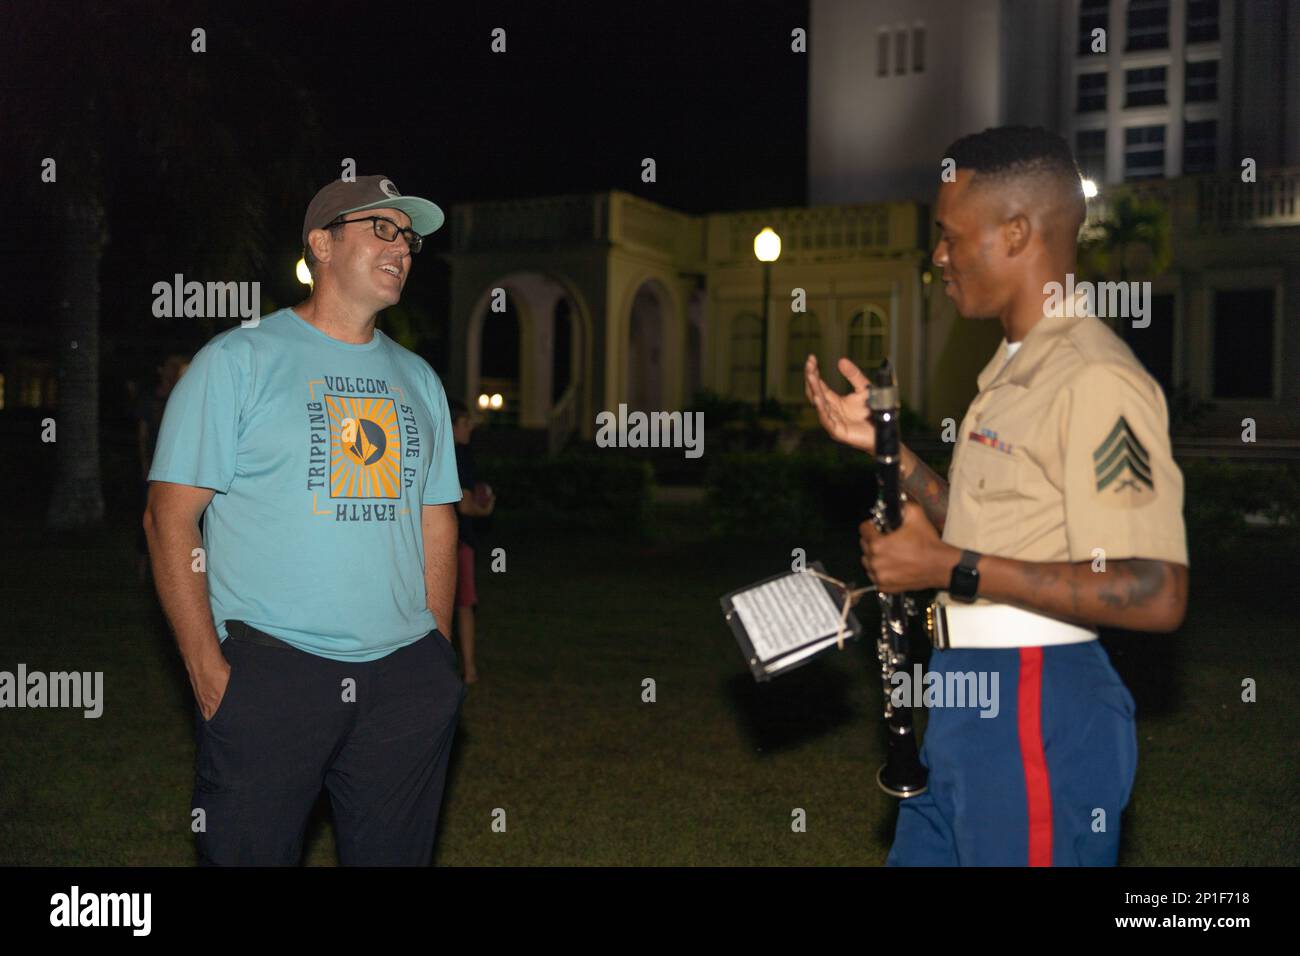 A U.S. Marine with Marine Corps Forces Pacific Band interacts with an attendee after a live concert for the local community at Plaza de Espana, Hagatna, Guam, Jan. 23, 2023. The MARFORPAC Band participated in multiple community engagements during their visit to Guam as part of the Naval Support Activity, Marine Corps Base Camp Blaz Reactivation and Naming Ceremony. In order to encourage music education and showcase the vibrant history and tradition of military music, the band is active in providing clinics and concerts for the communities they serve. The MARFORPAC Band performs throughout the Stock Photo